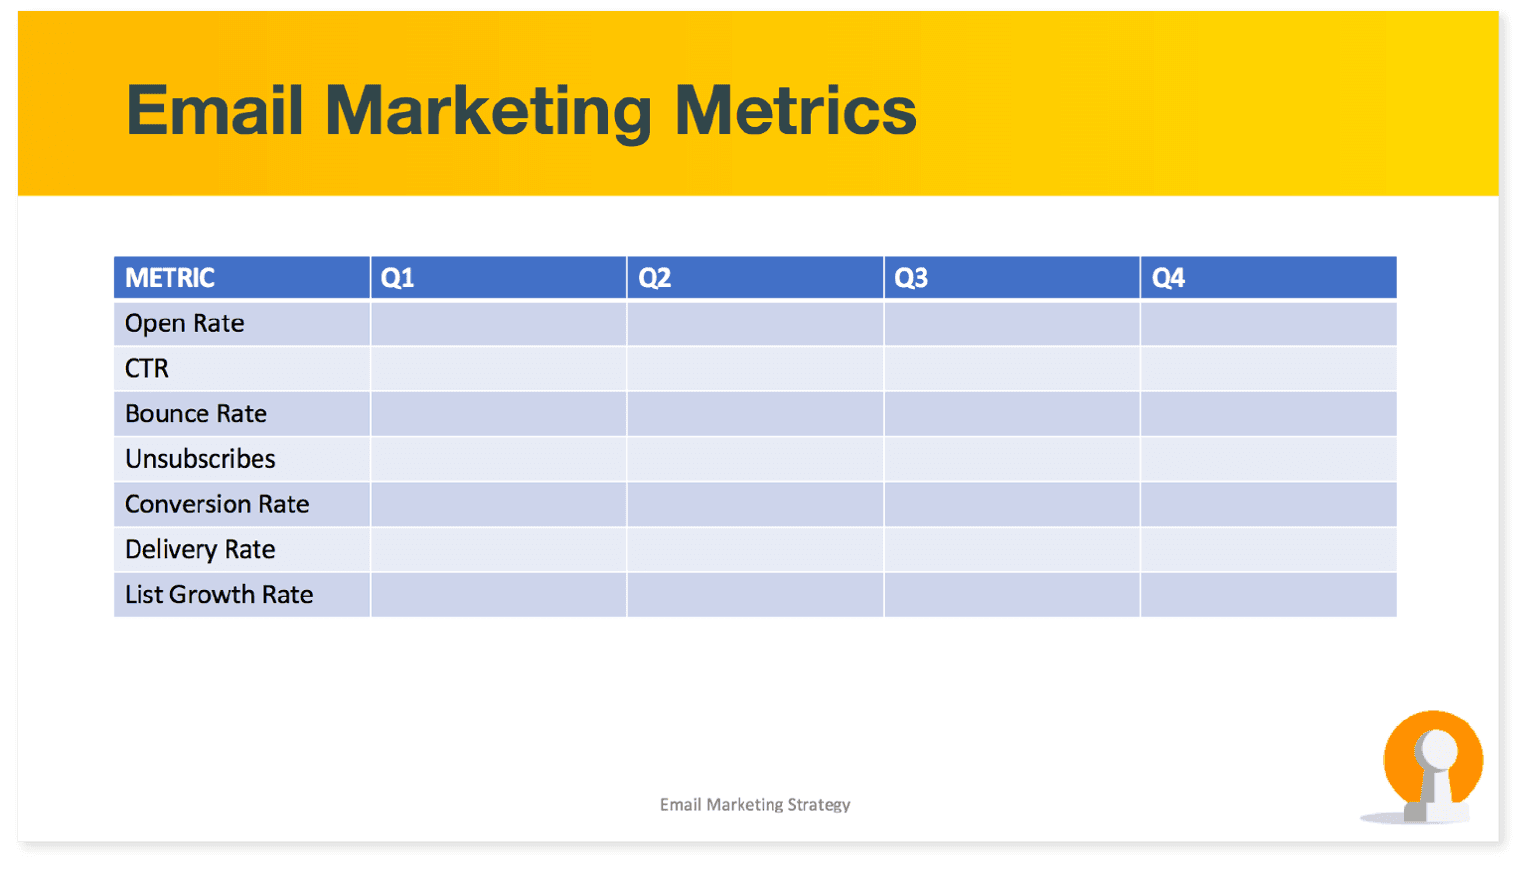 Adding metrics to the strategy template